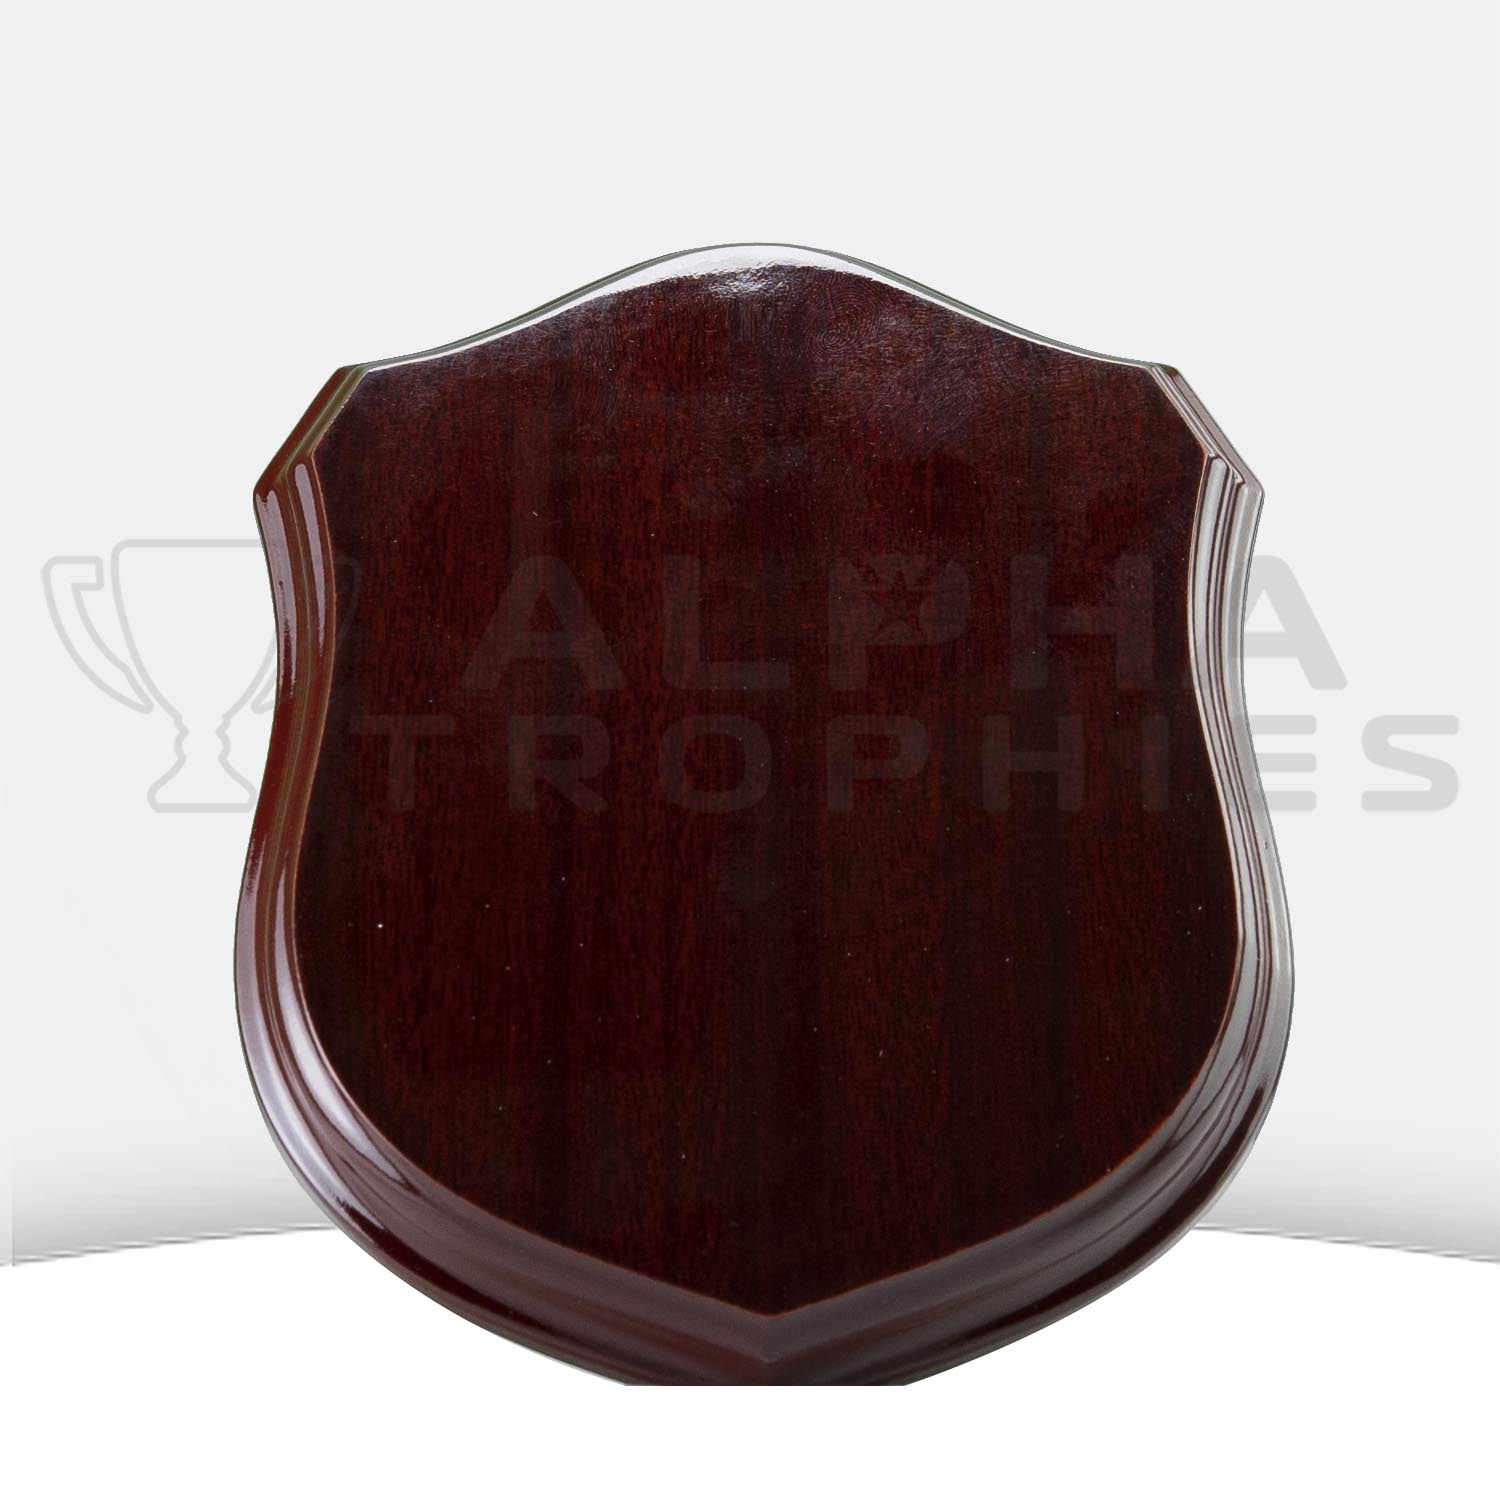 shield-plaque-817-7wg-front